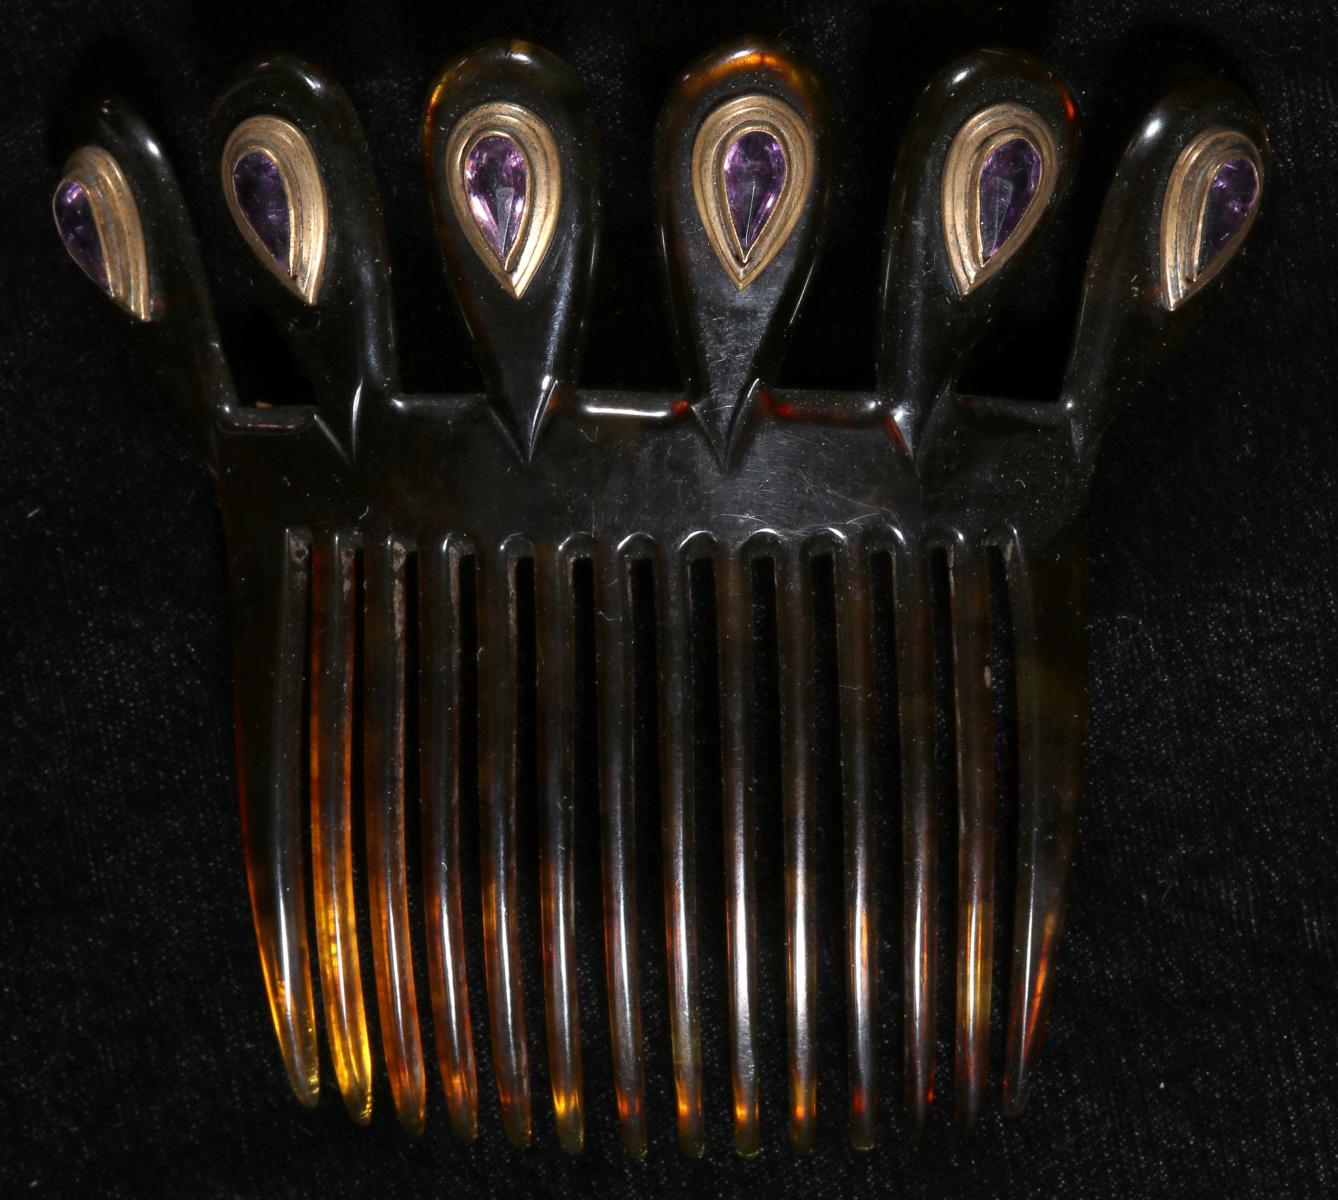 A VICTORIAN HAIR COMB WITH FACETED PURPLE STONES